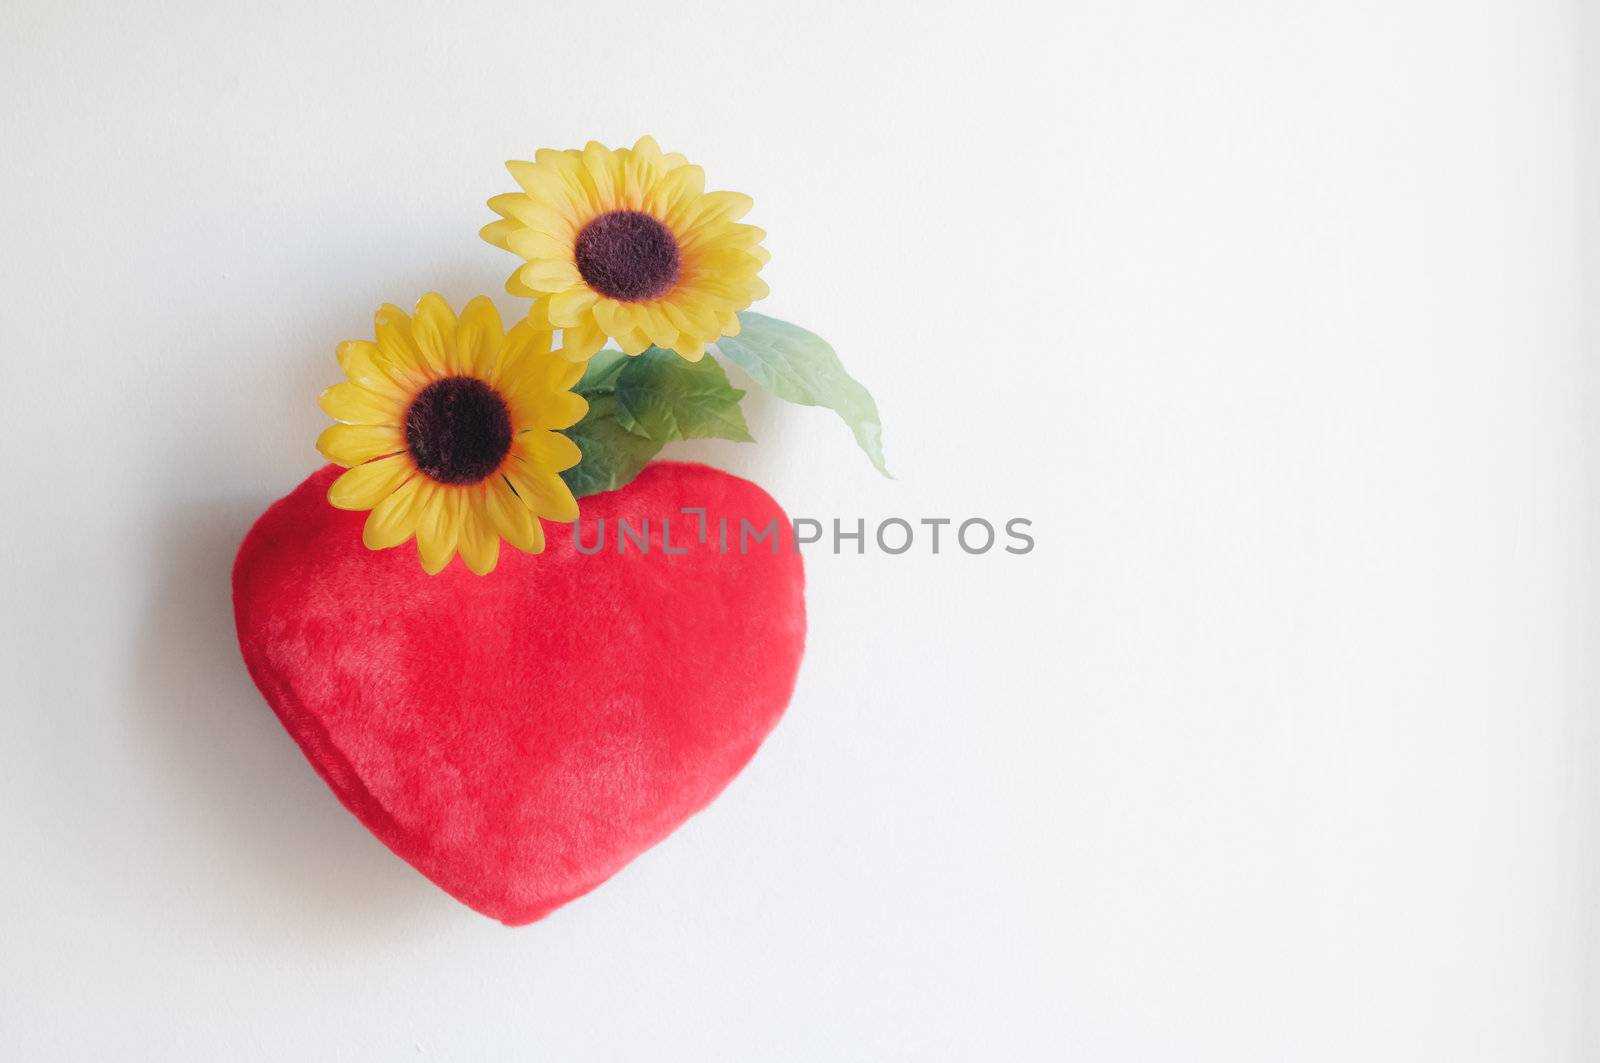 heart pillow and daisies love textured artistic 